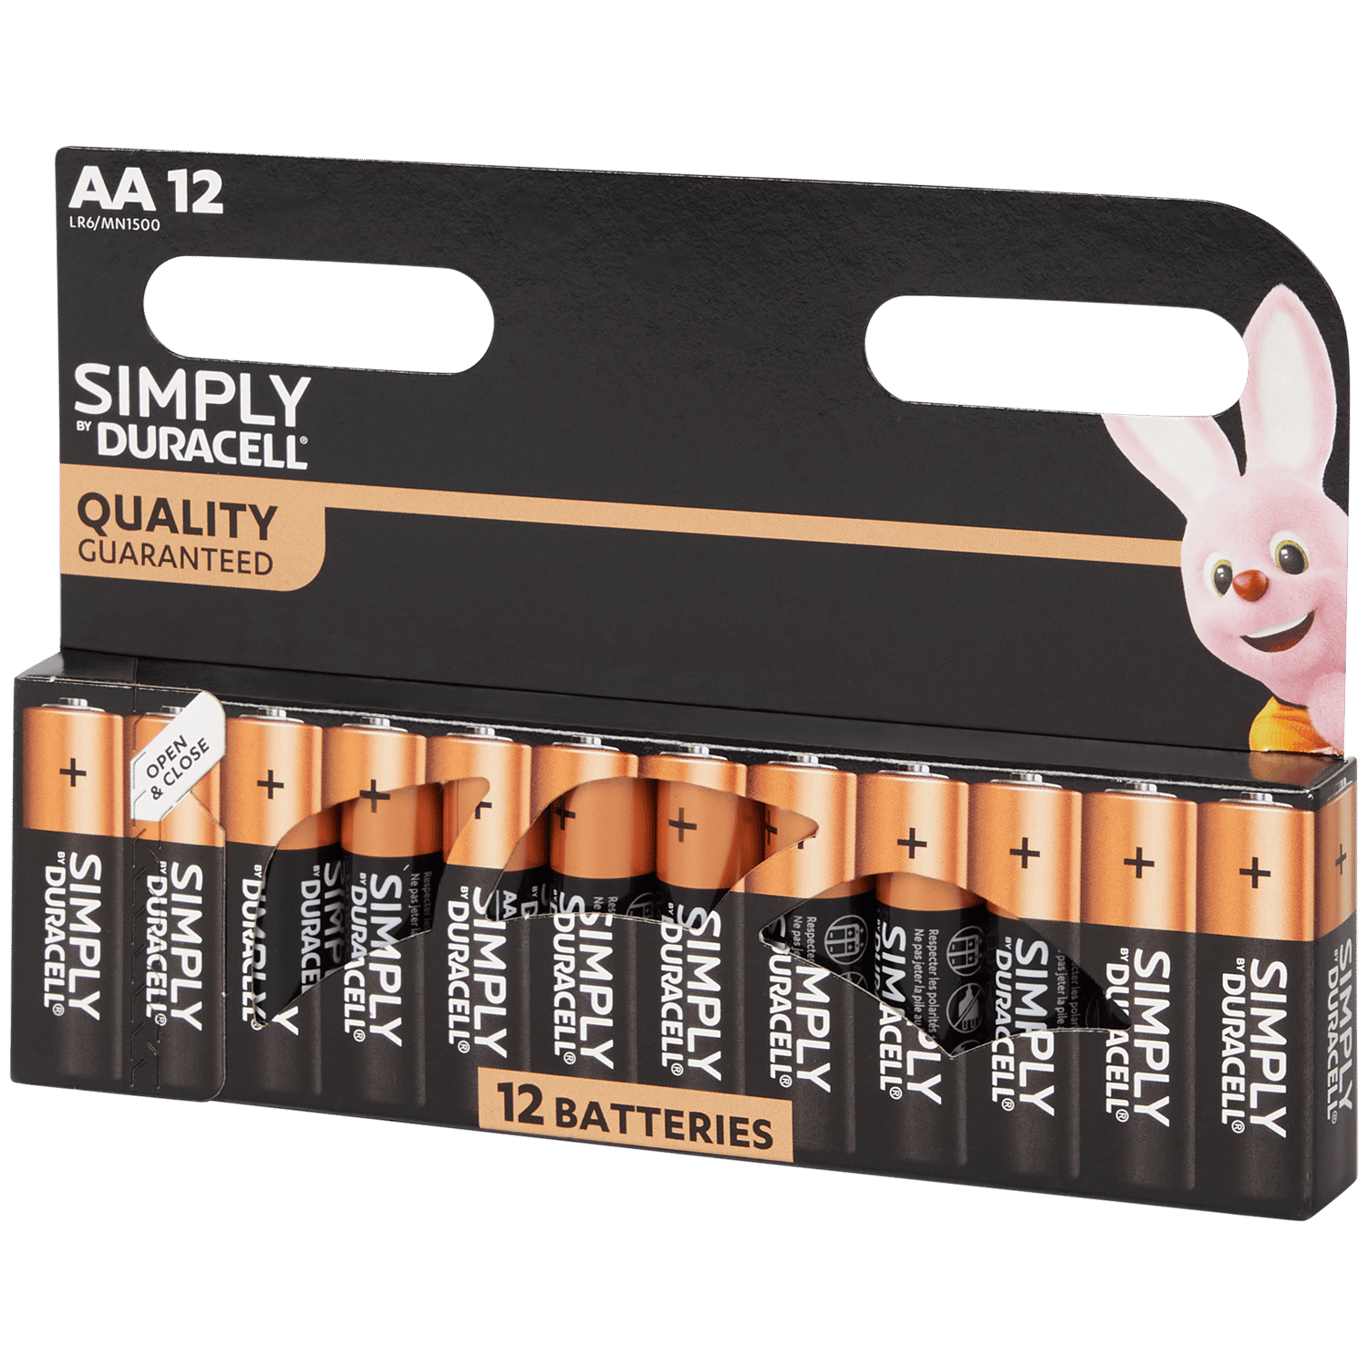 Duracell AA Action.com